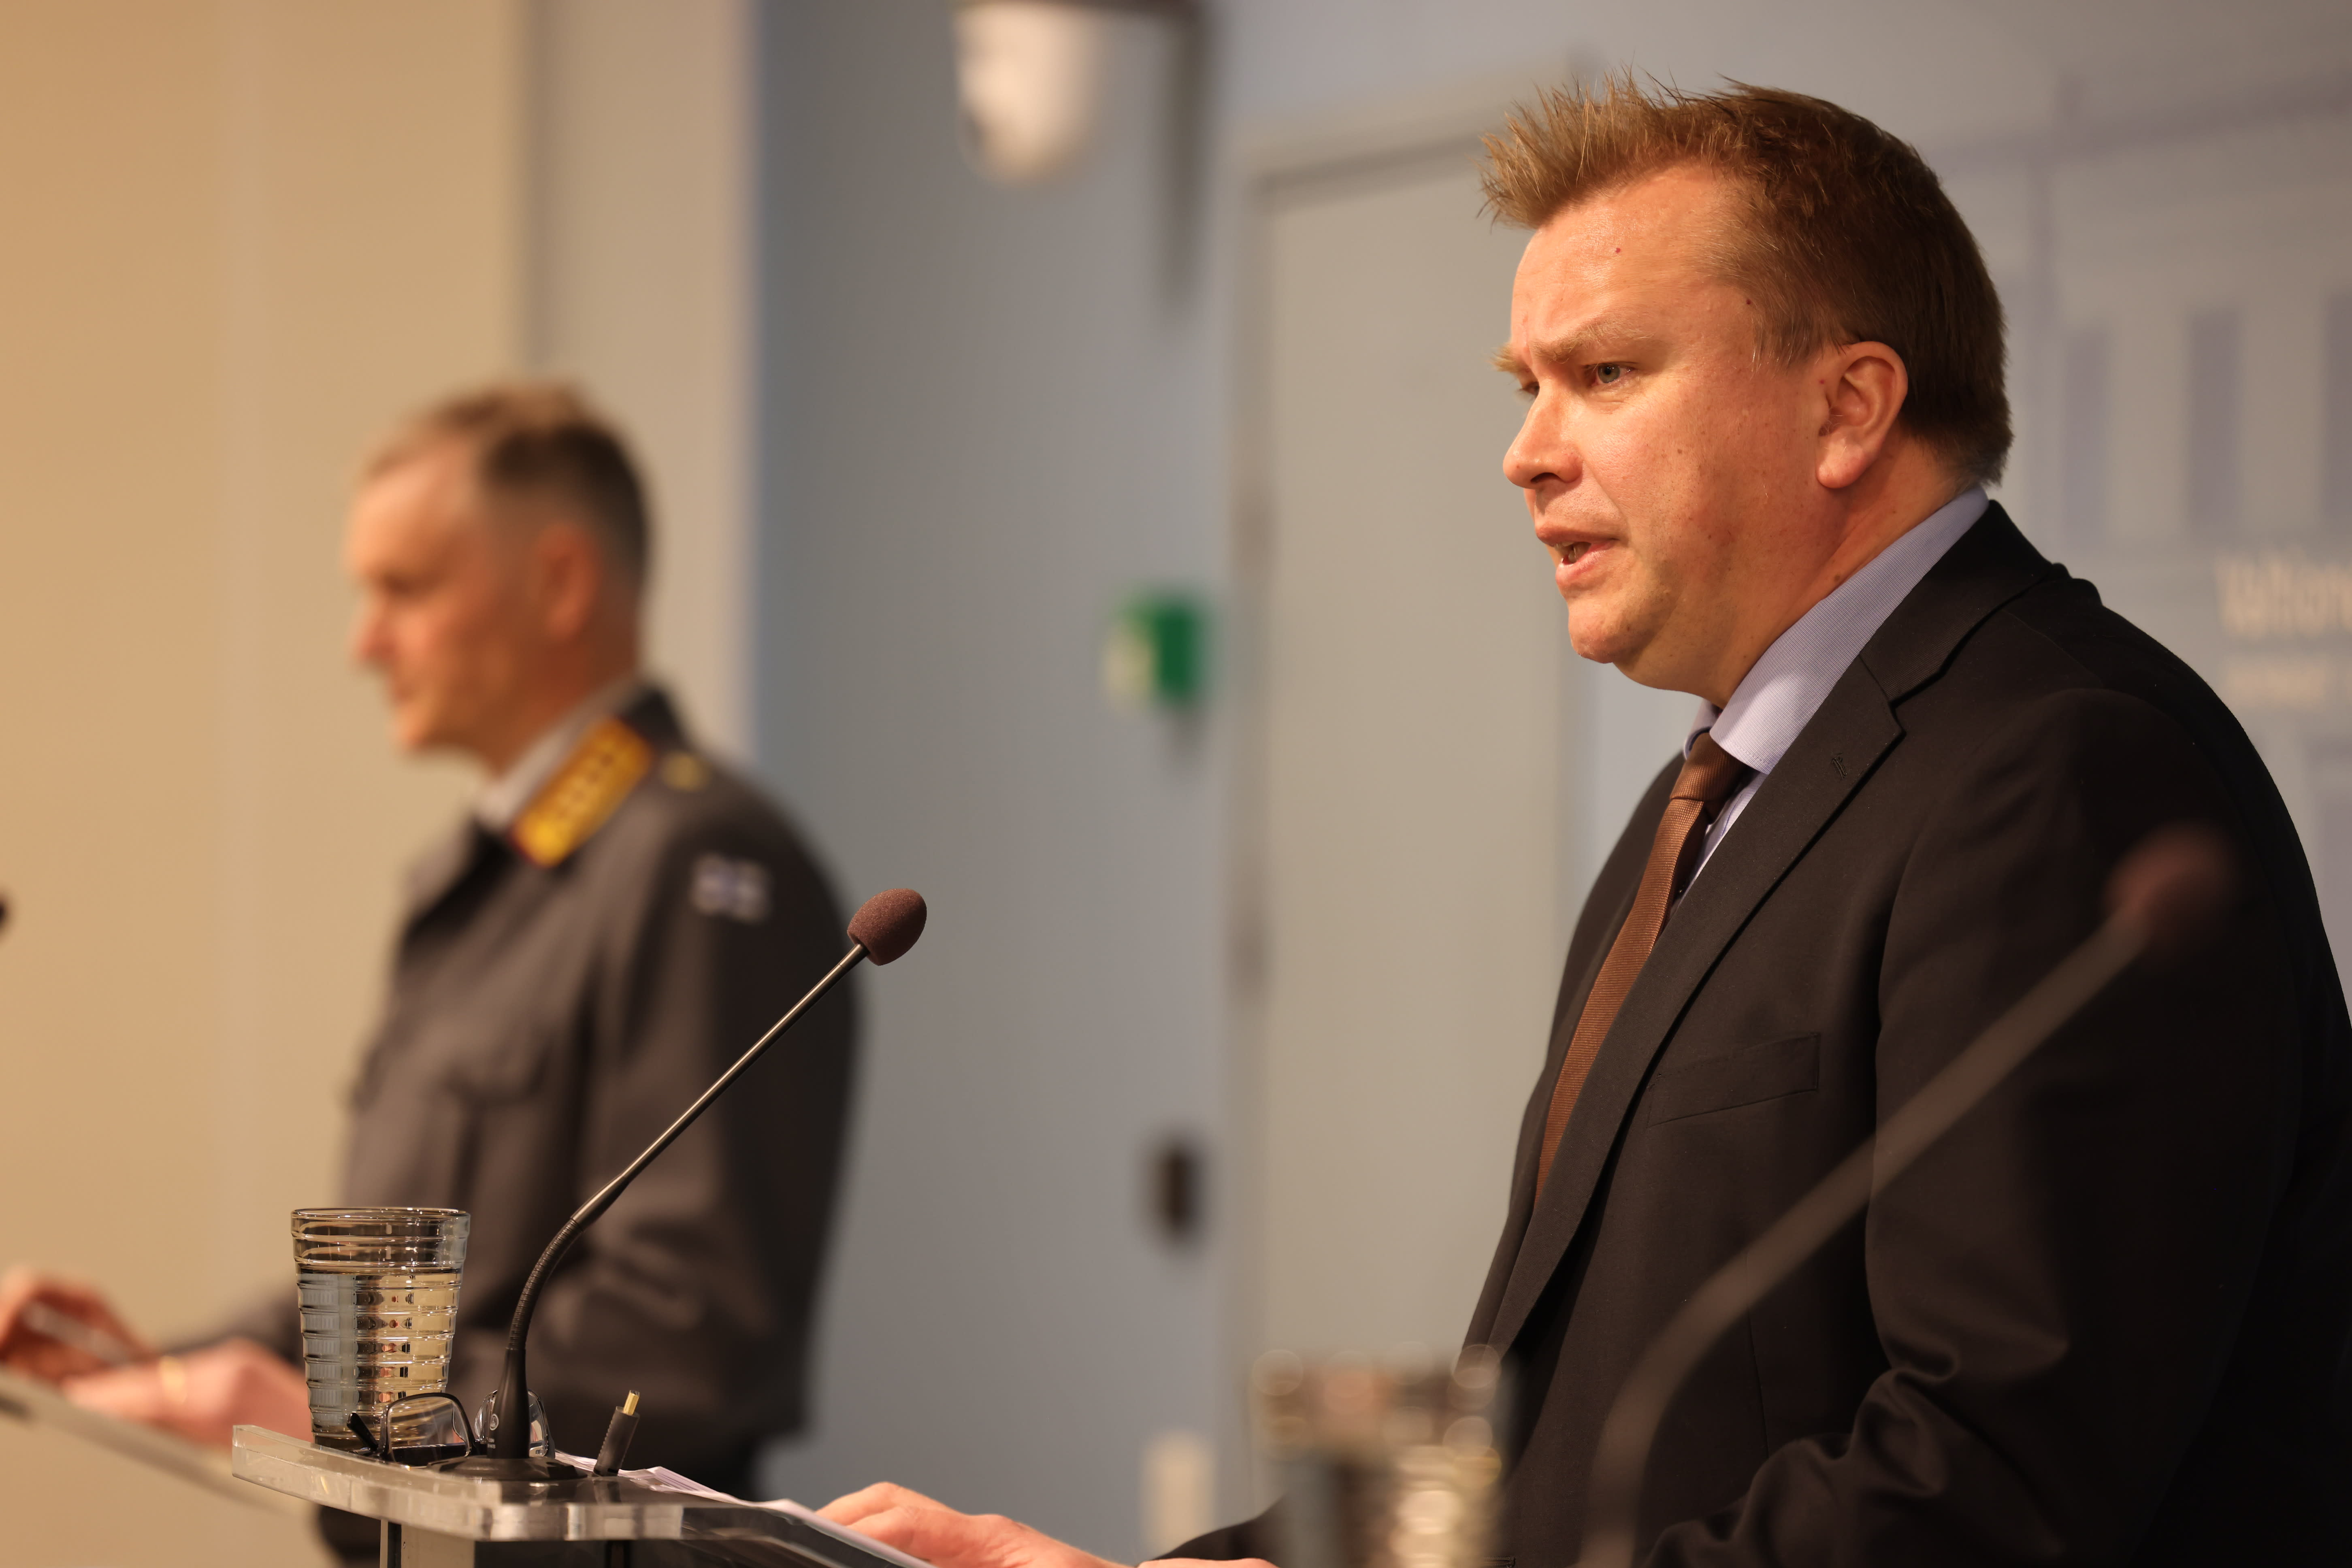 Finland is directing resources to defense after Russia’s invasion of Ukraine